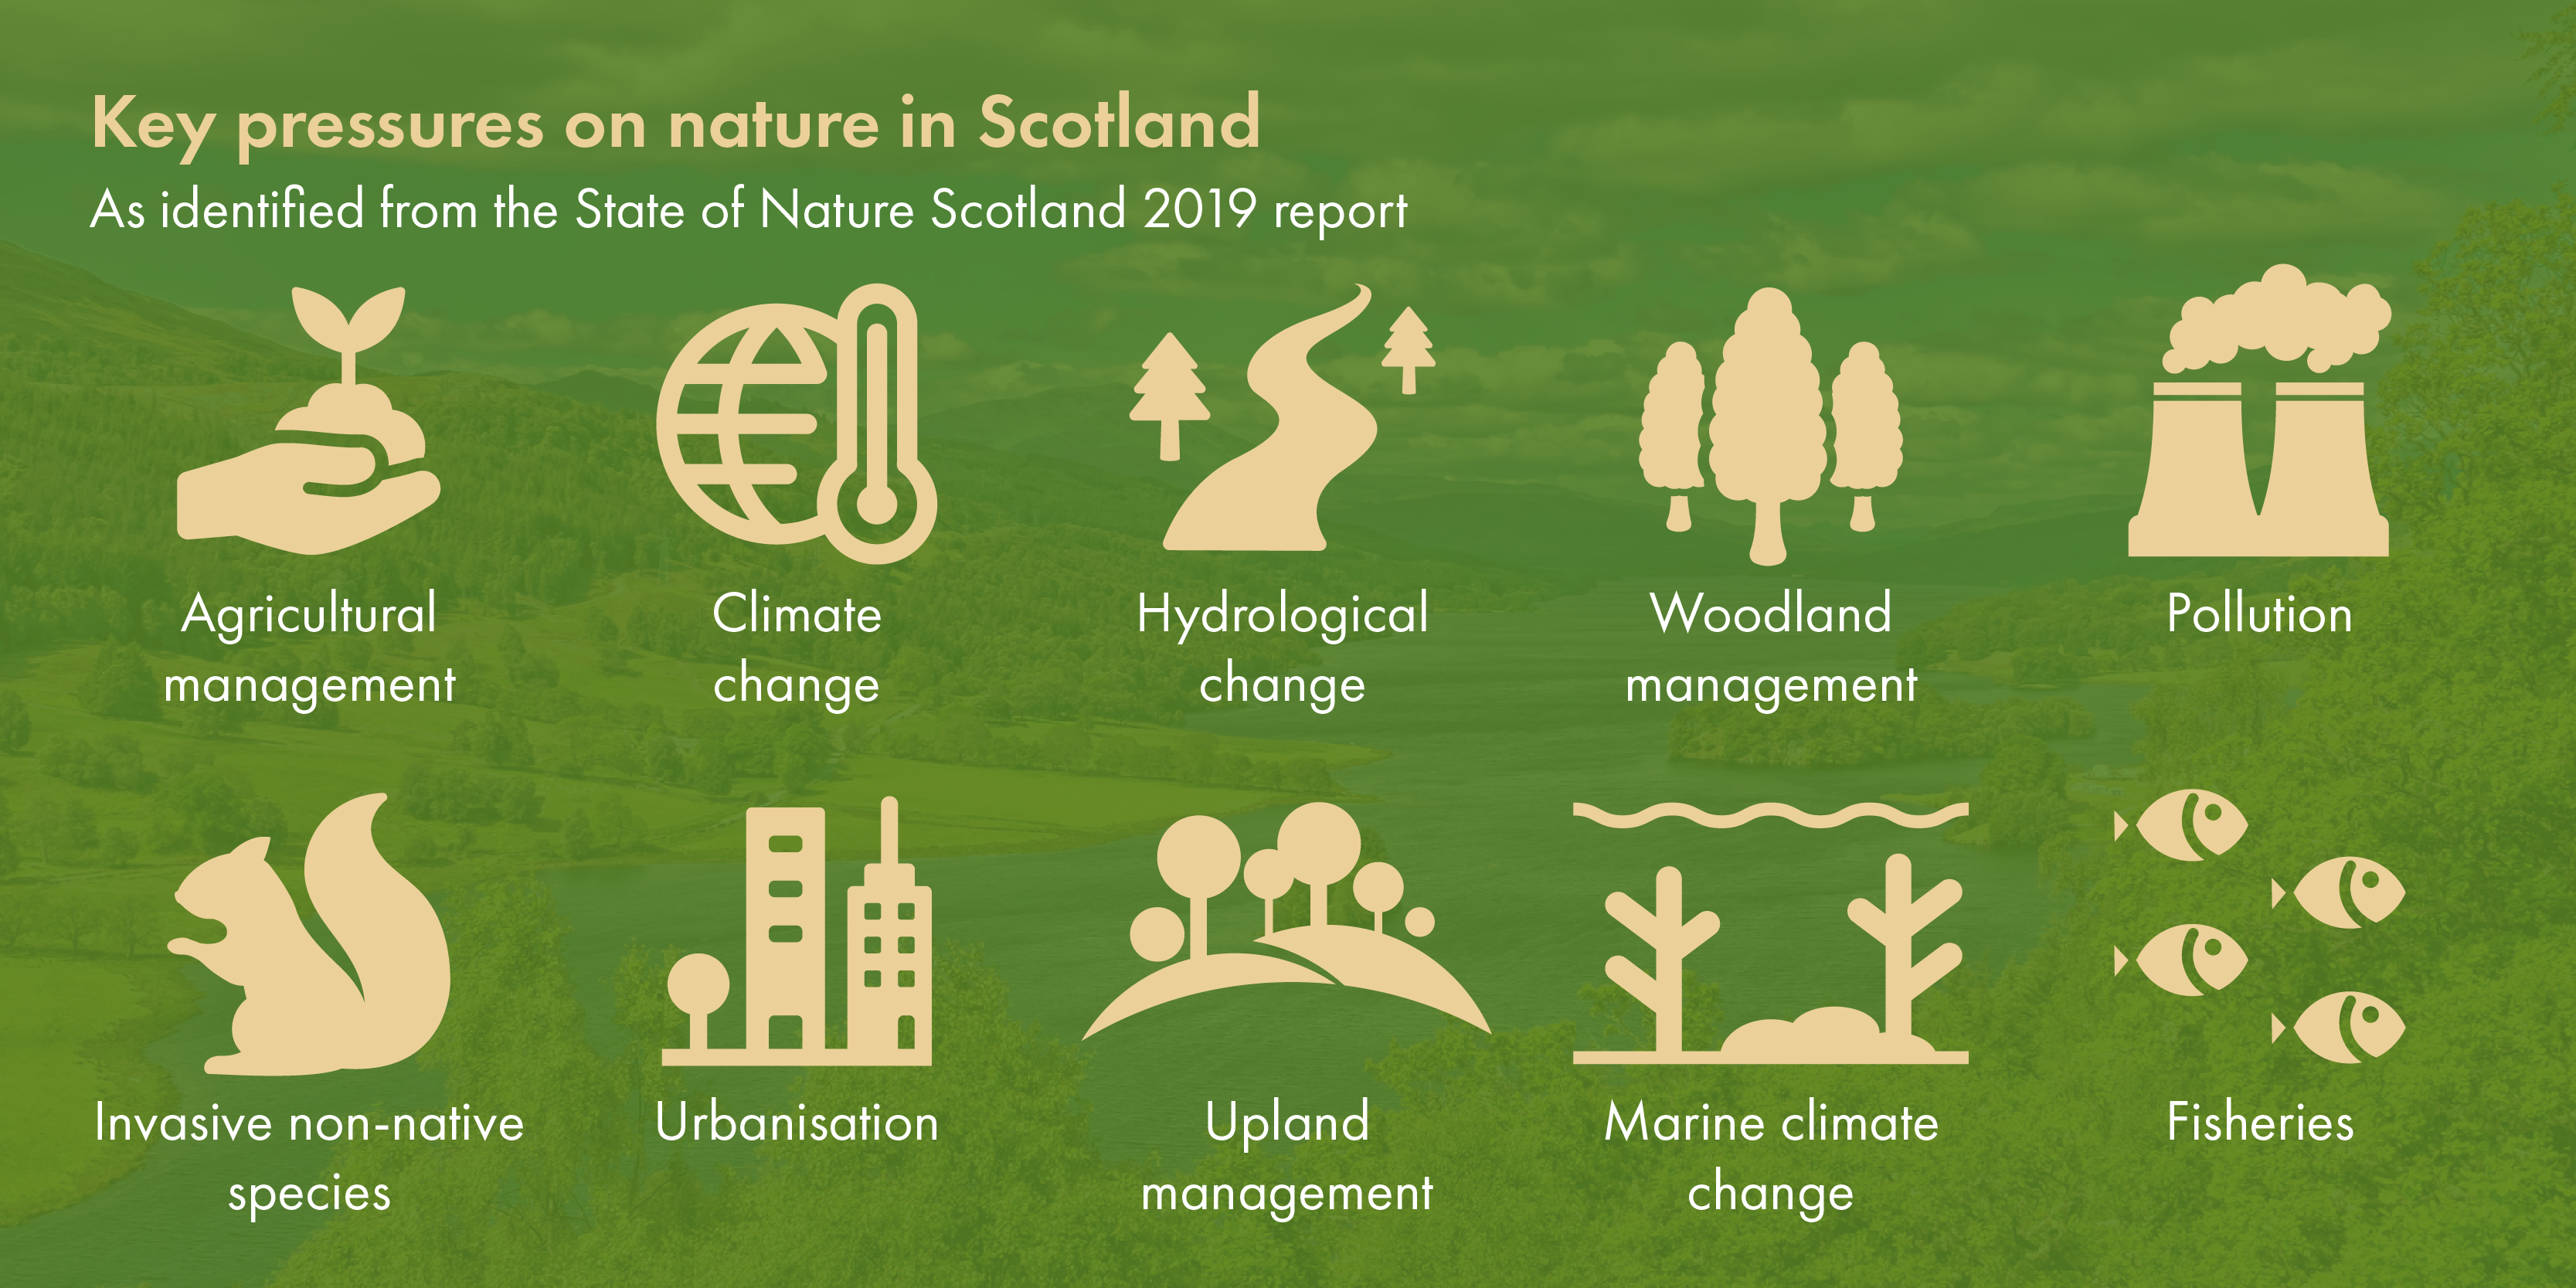 Infographic showing key pressures on nature in Scotland. These are agricultural management, climate change, hydrological change, woodland management, pollution, invasive non-native species, urbanisation, upland management, marine climate change, fisheries.